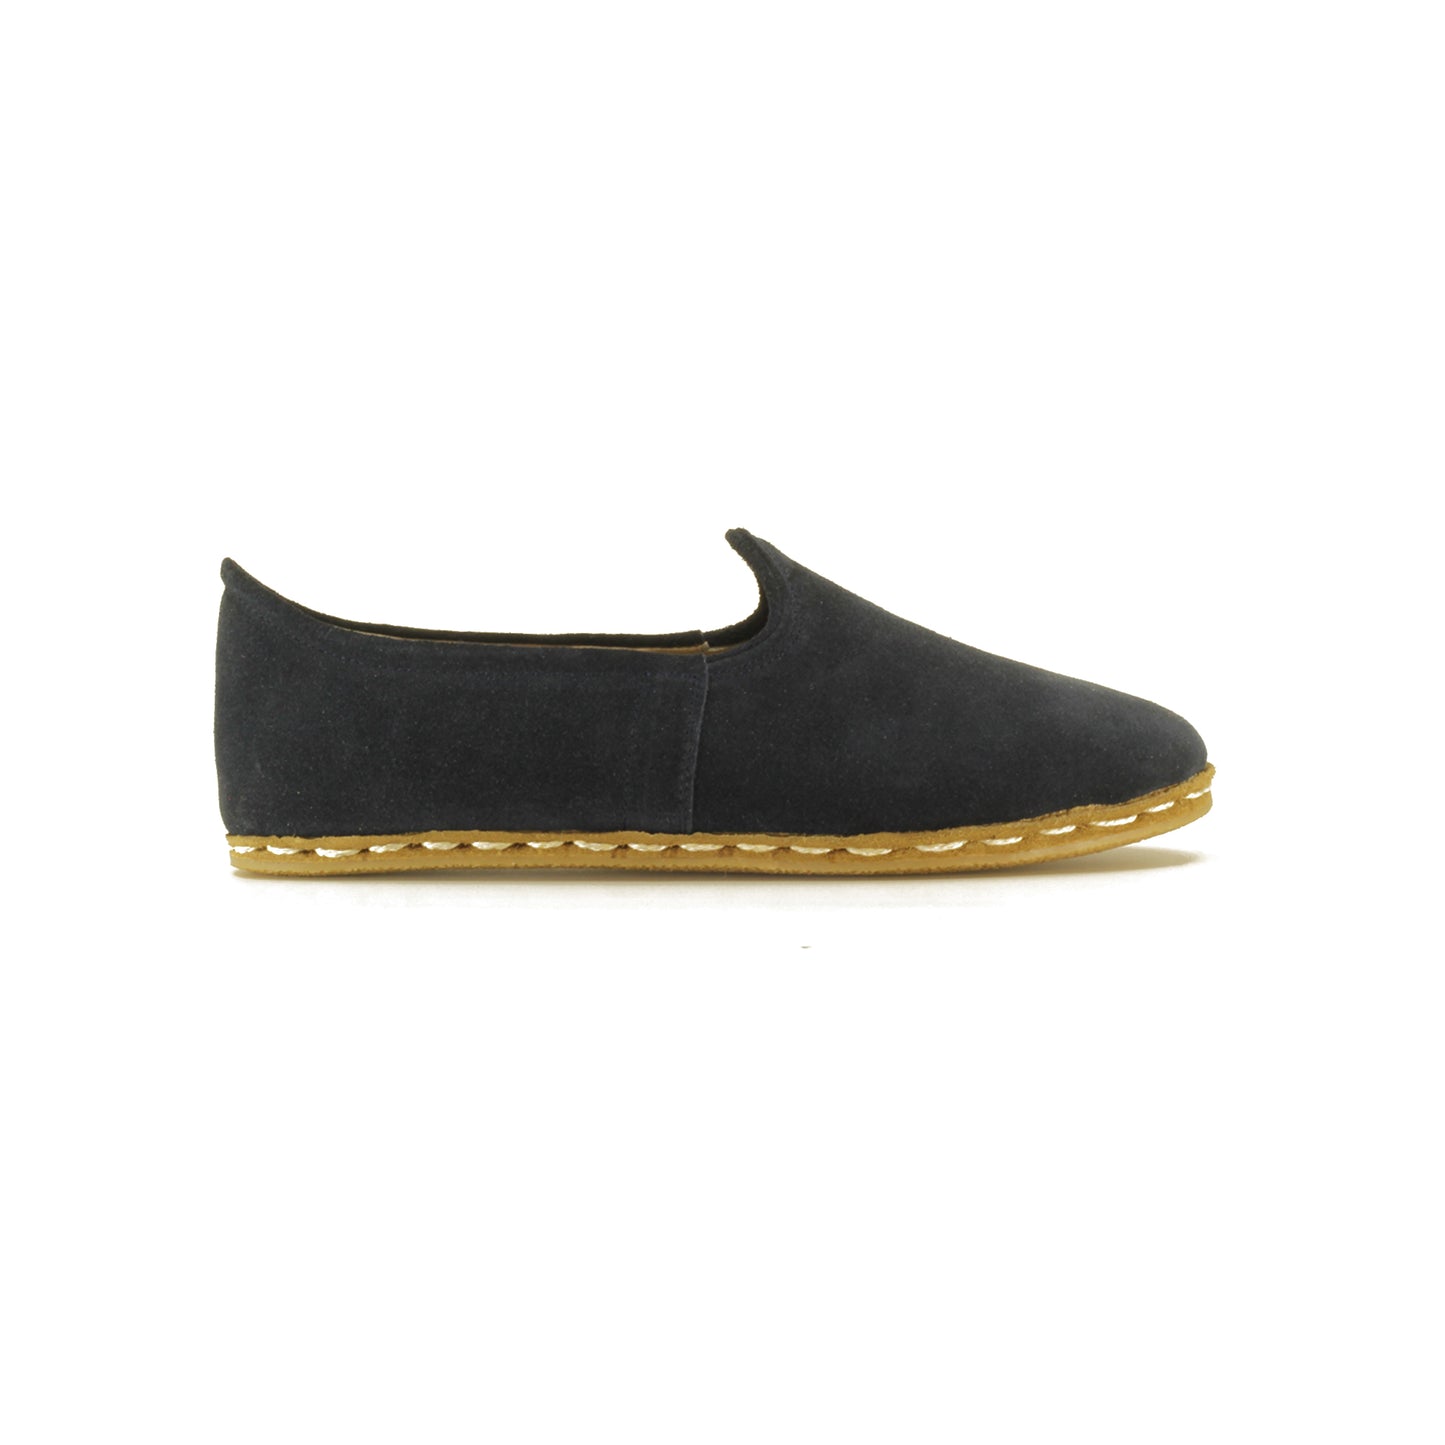 Navy Blue Colour Shoes Handmade Suede Leather - Nefes Shoes